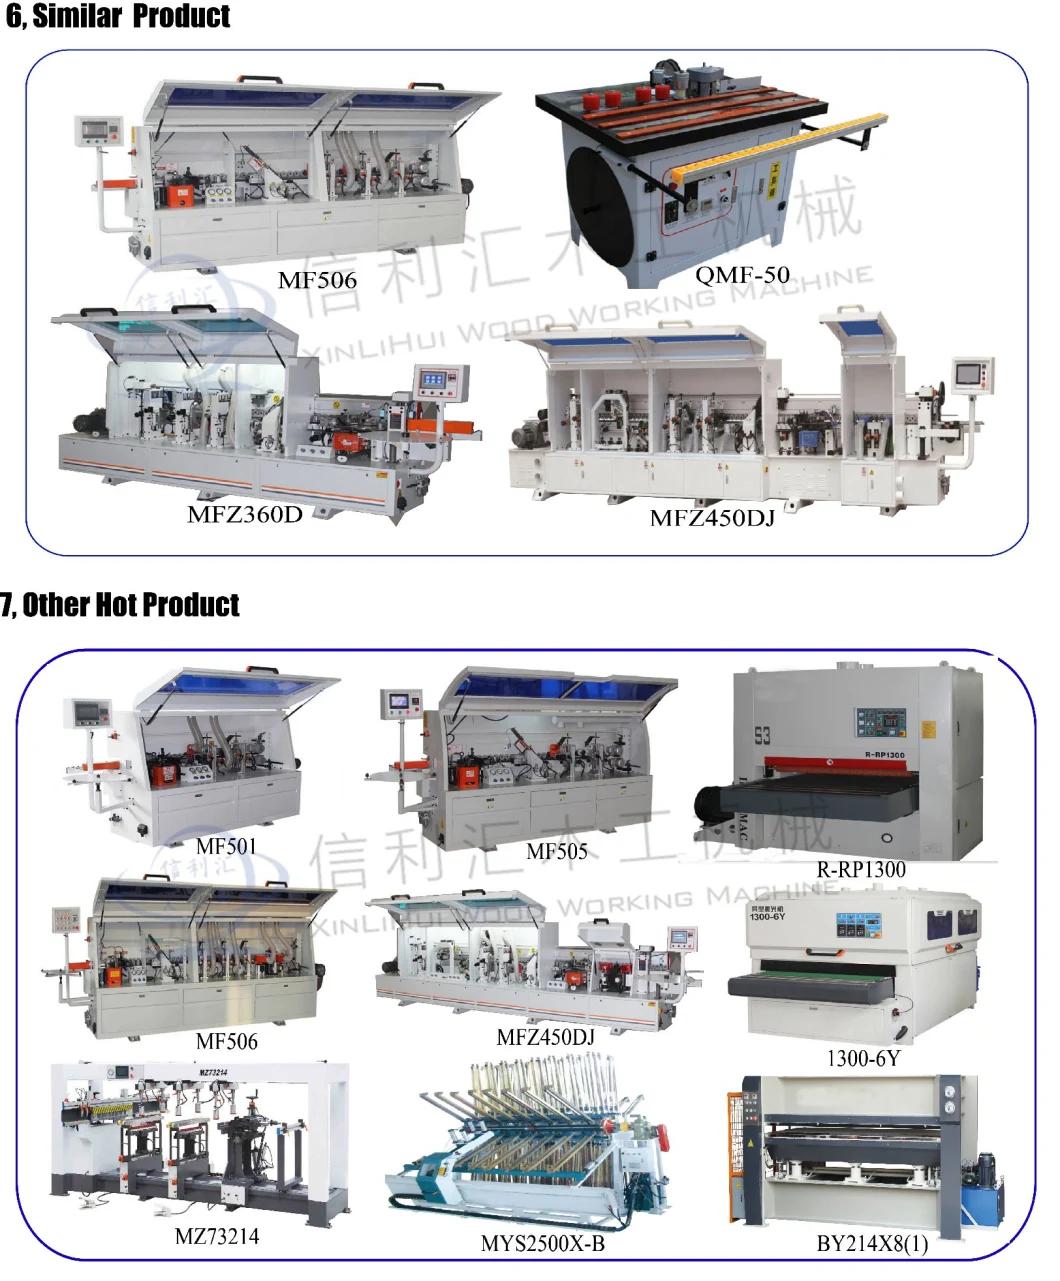 Woodworking Machine Manual Single Head Tenoner/ Multi-Head Tenoner for Making Stretch Bars/ Automatic Dovetailing Machine/ Automatic Double Rounding-off Tenoner